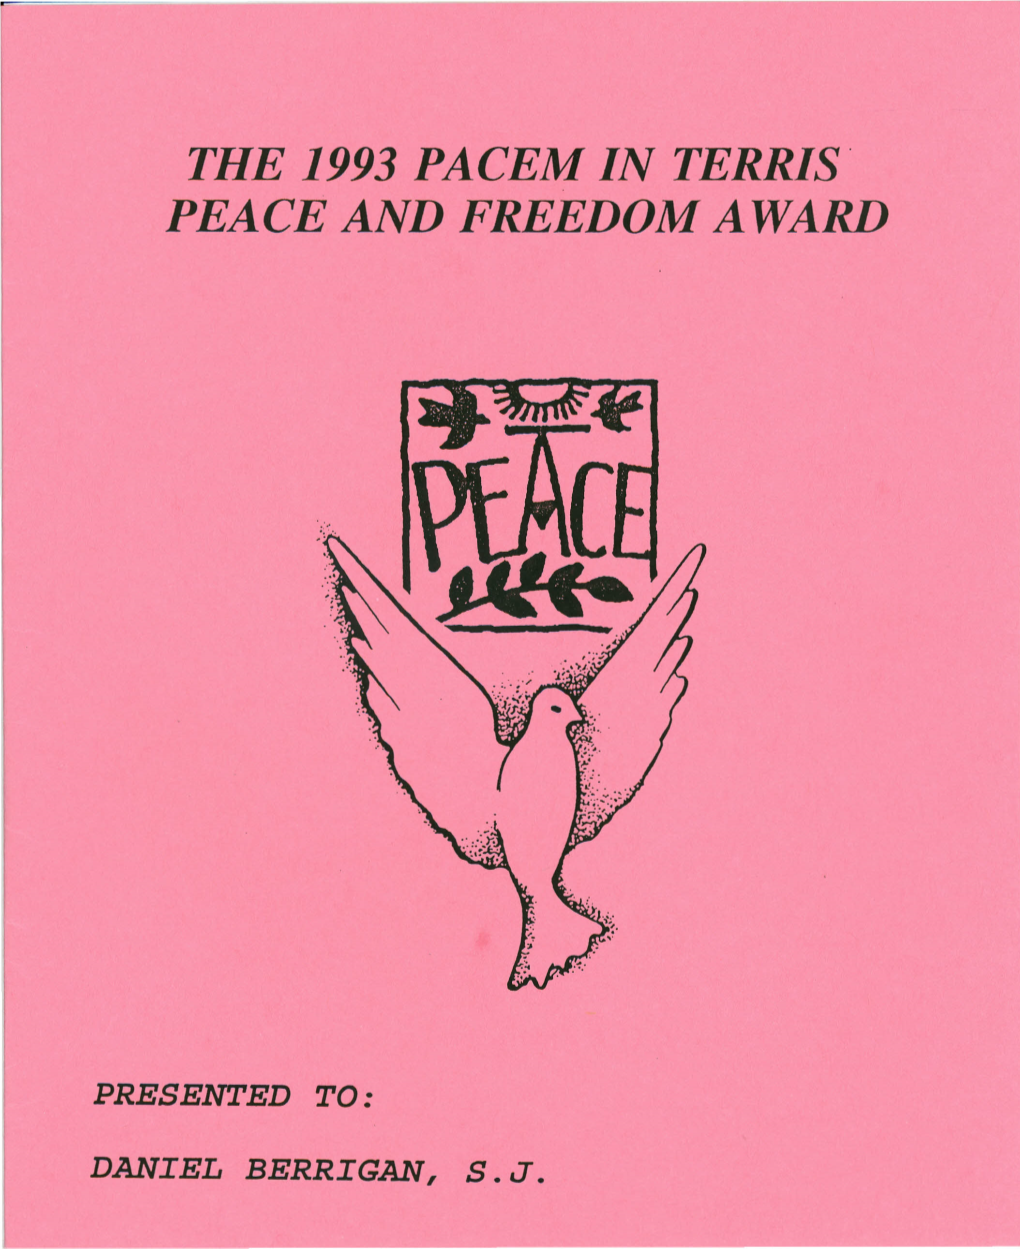 The 1993 Pacem in Terris' Peace and Freedom Award